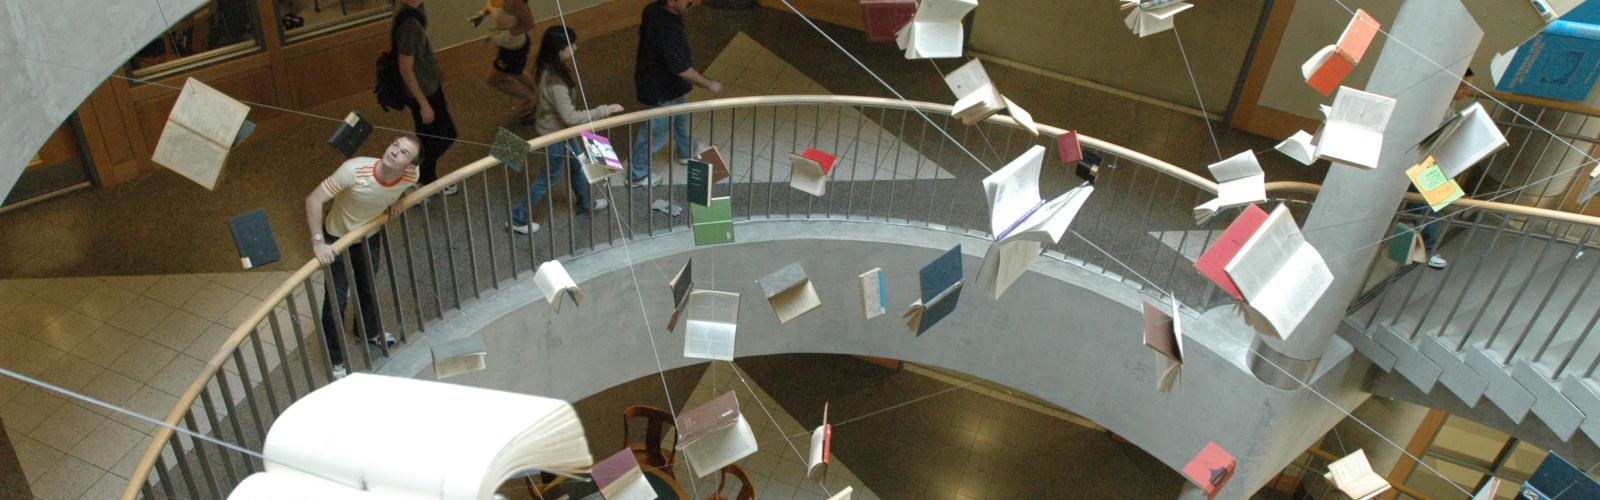 Book installation at library